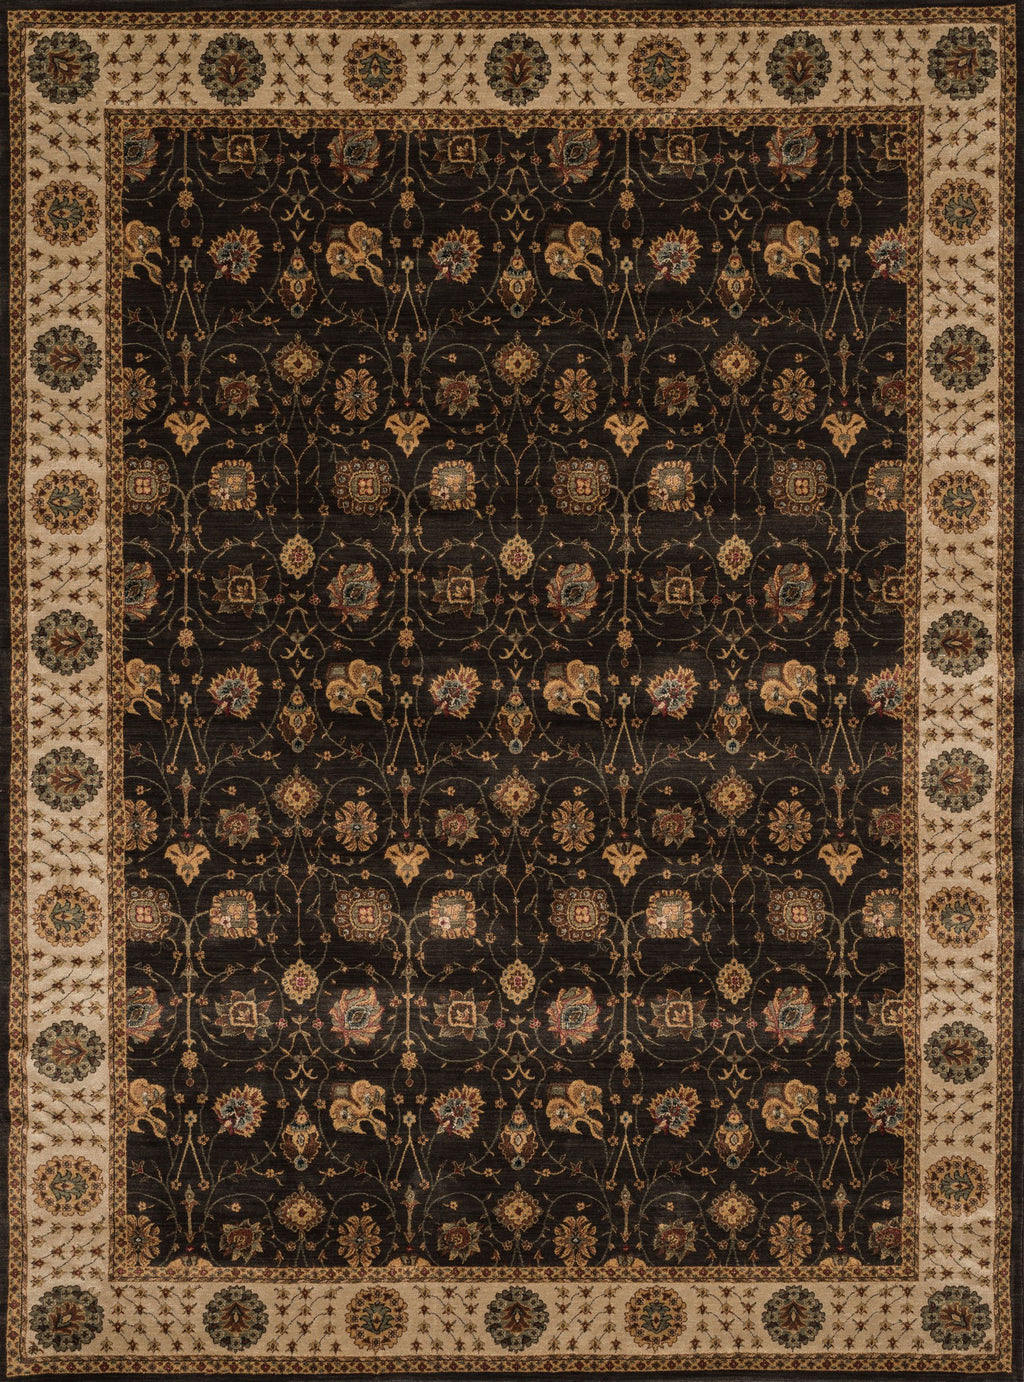 Loloi Stanley ST-09 Expresso / Beige Area Rug main image